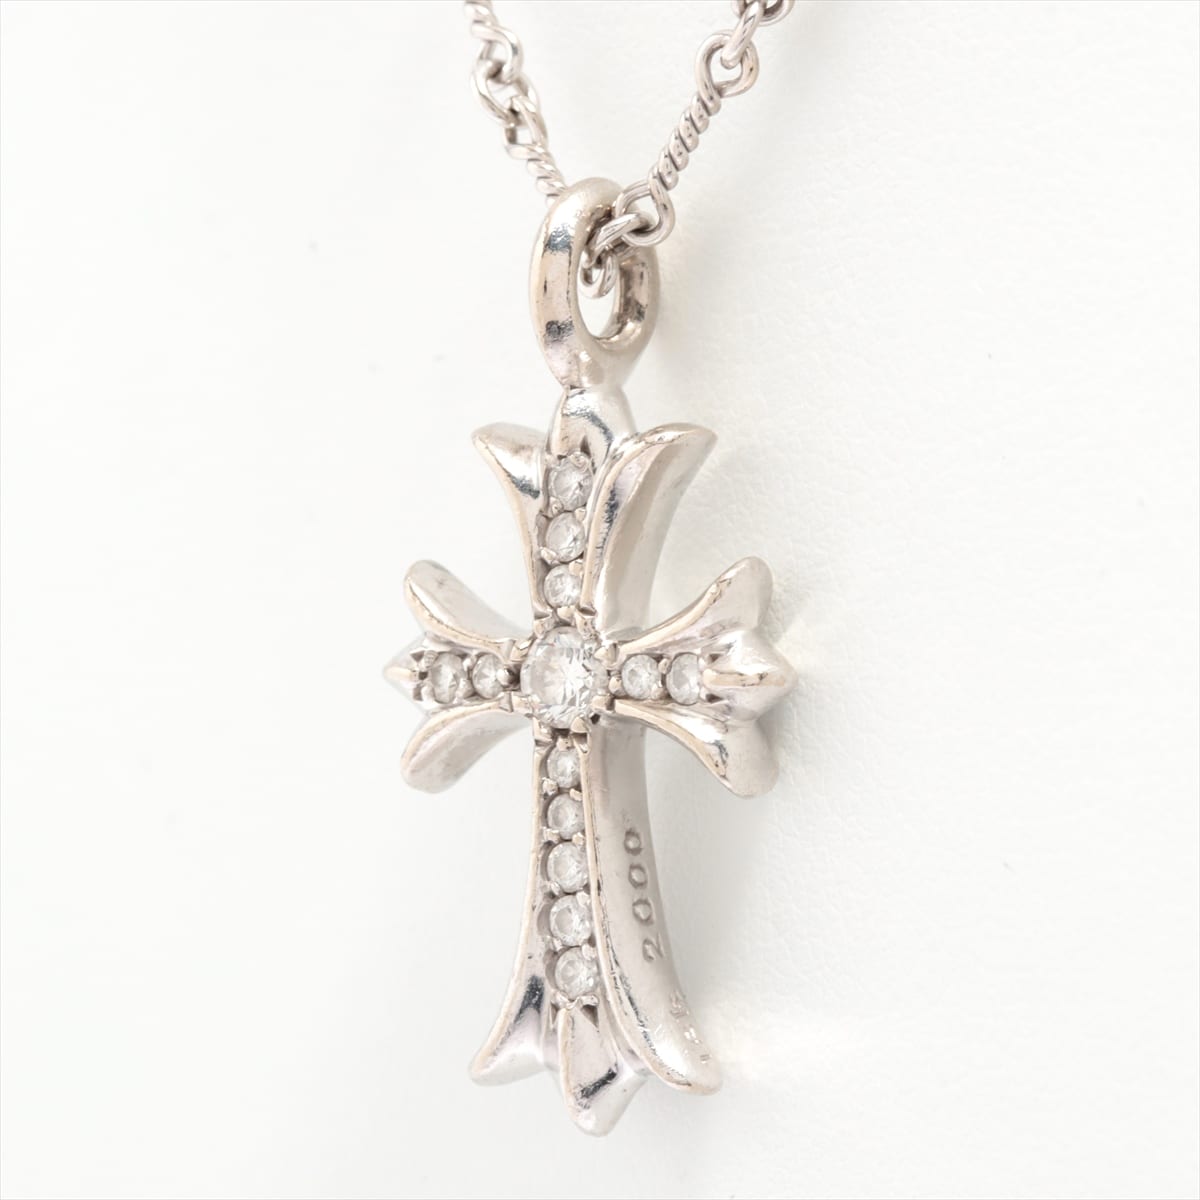 Chrome Hearts Tiny cross Necklace 18K 17.2g With invoice Pave diamonds Twist chain 18 inches